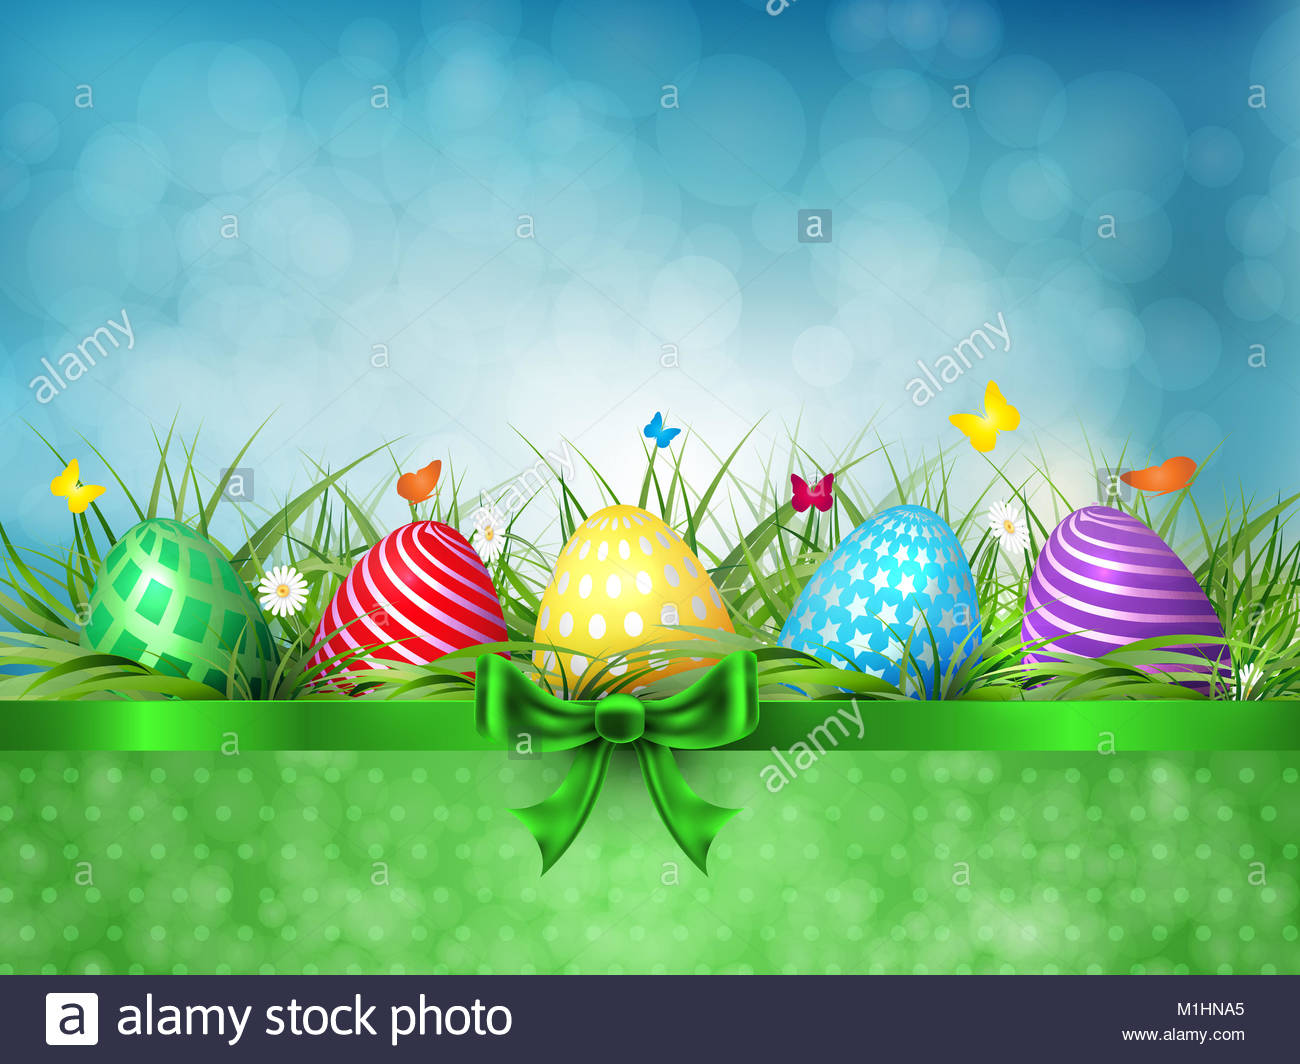 Happy Easter A congratulatory easter background with multi